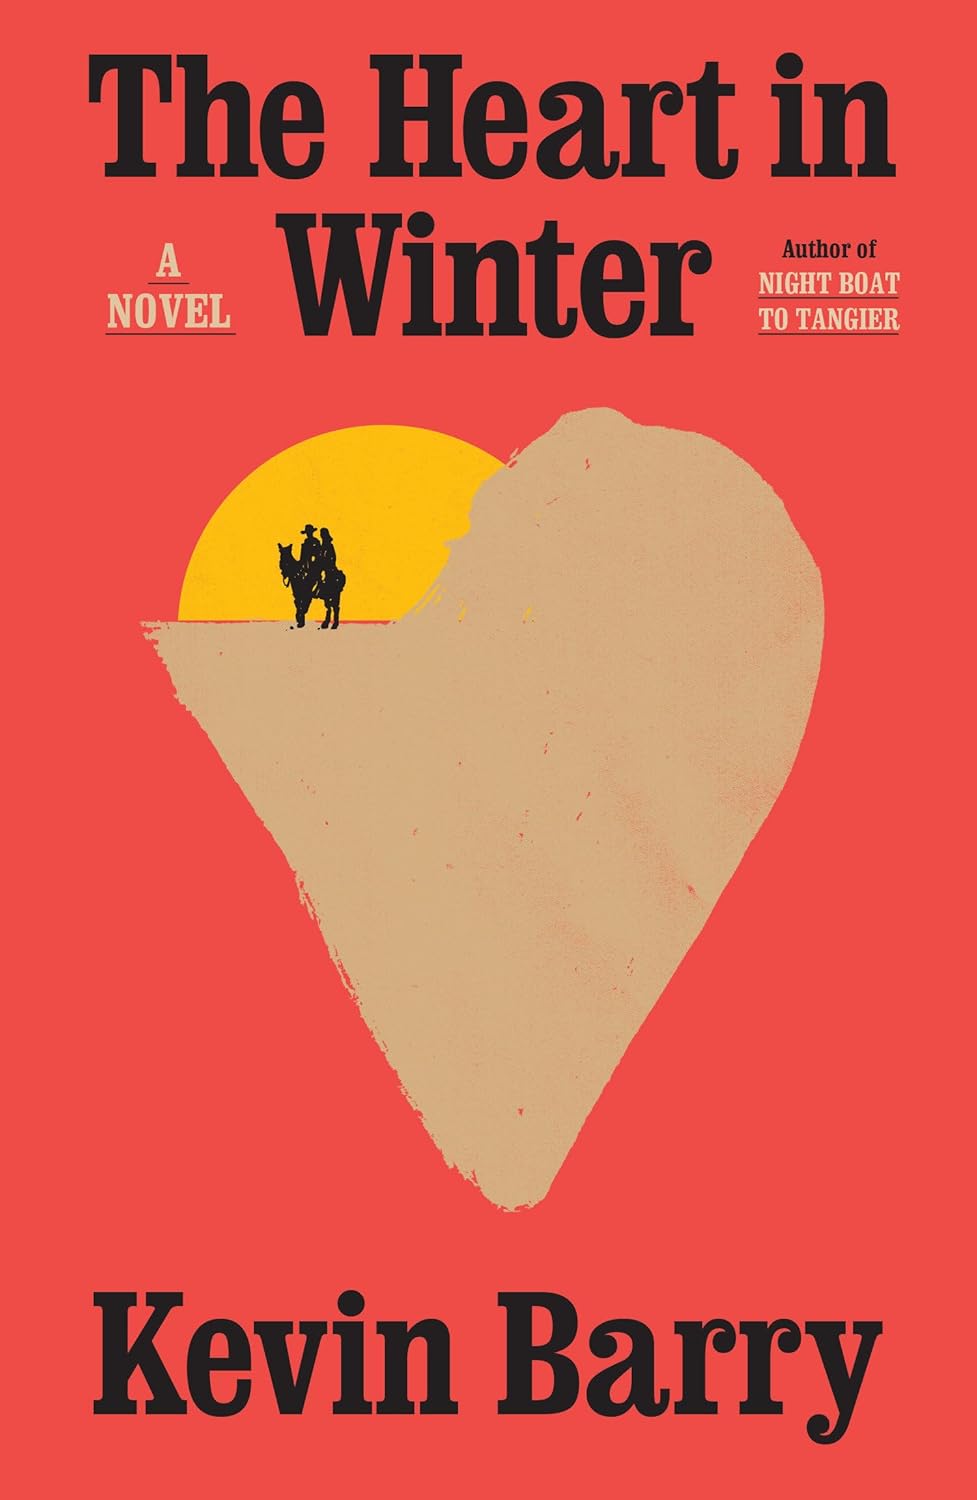 Image for "The Heart in Winter"